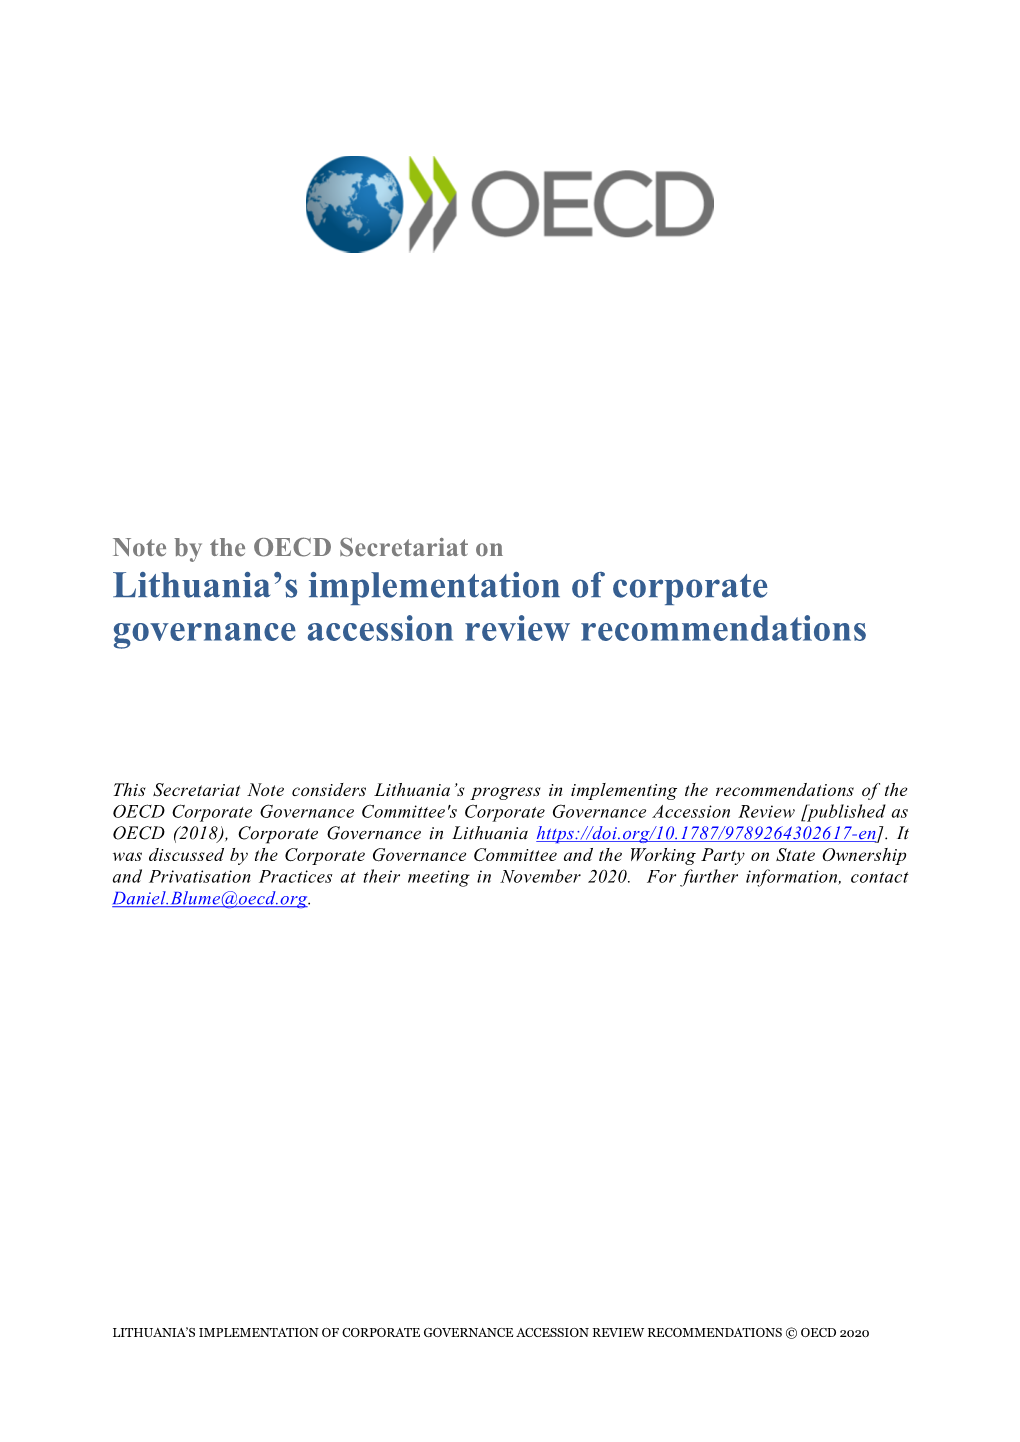 Lithuania's Implementation of Corporate Governance Accession Review Recommendations